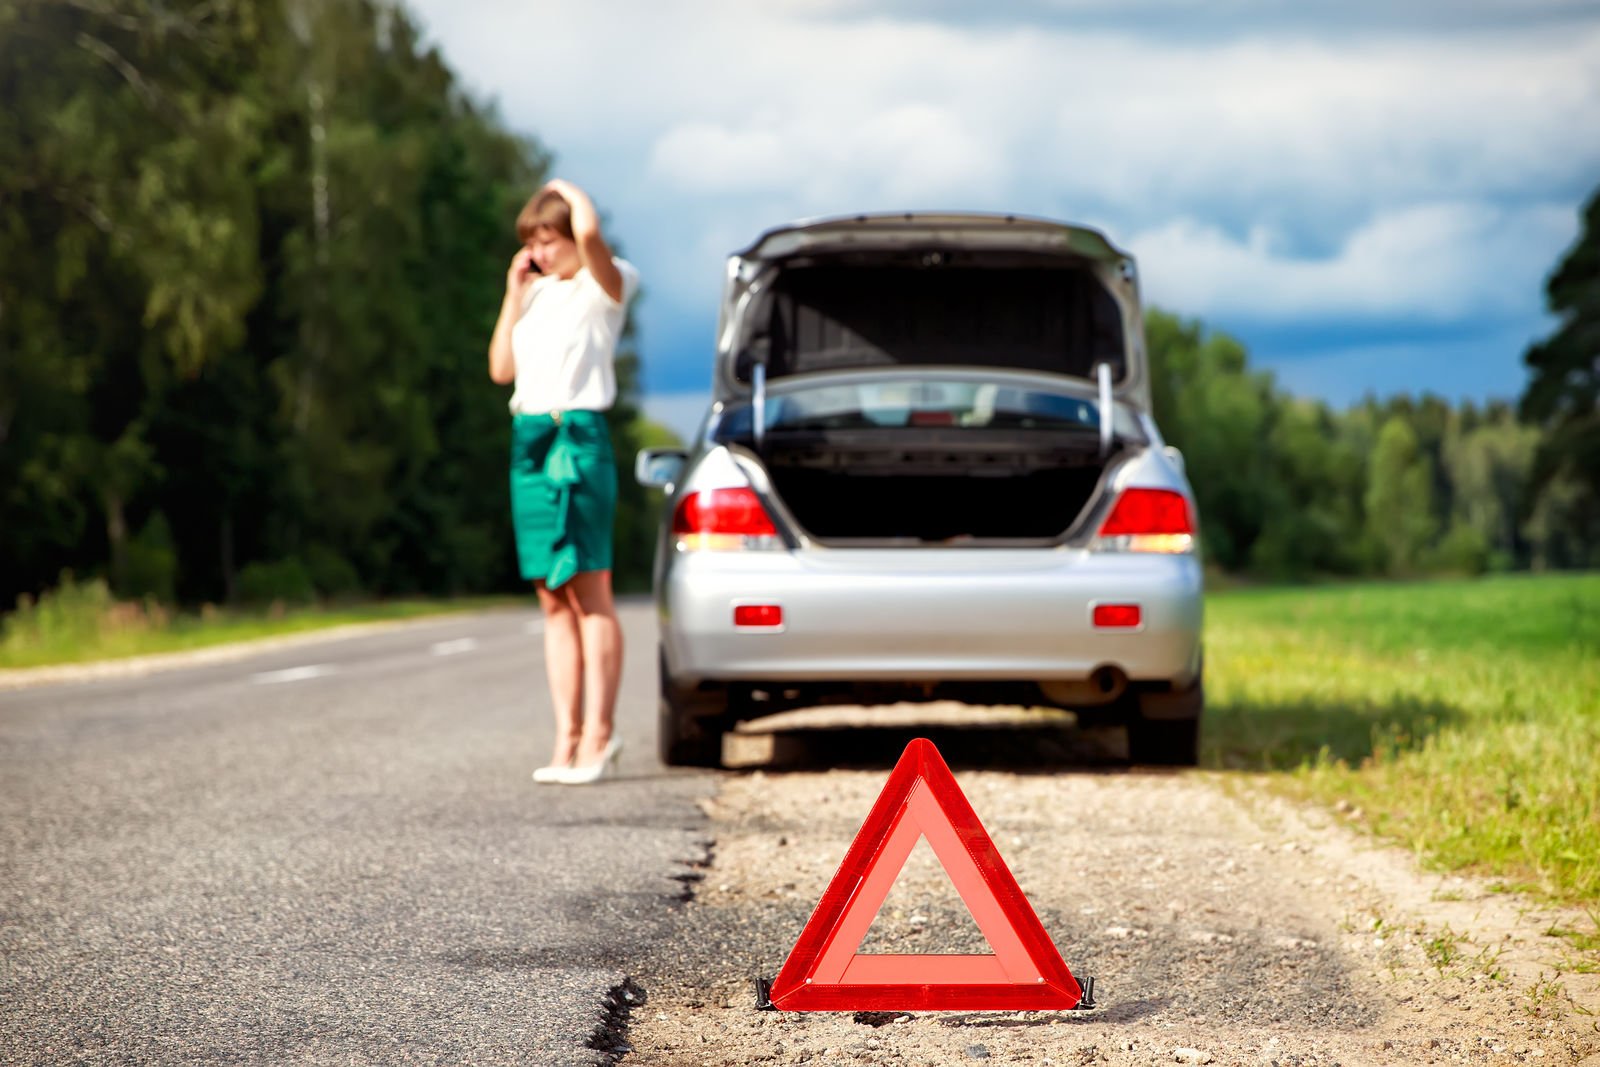 Can you tow a car that doesn’t have insurance?